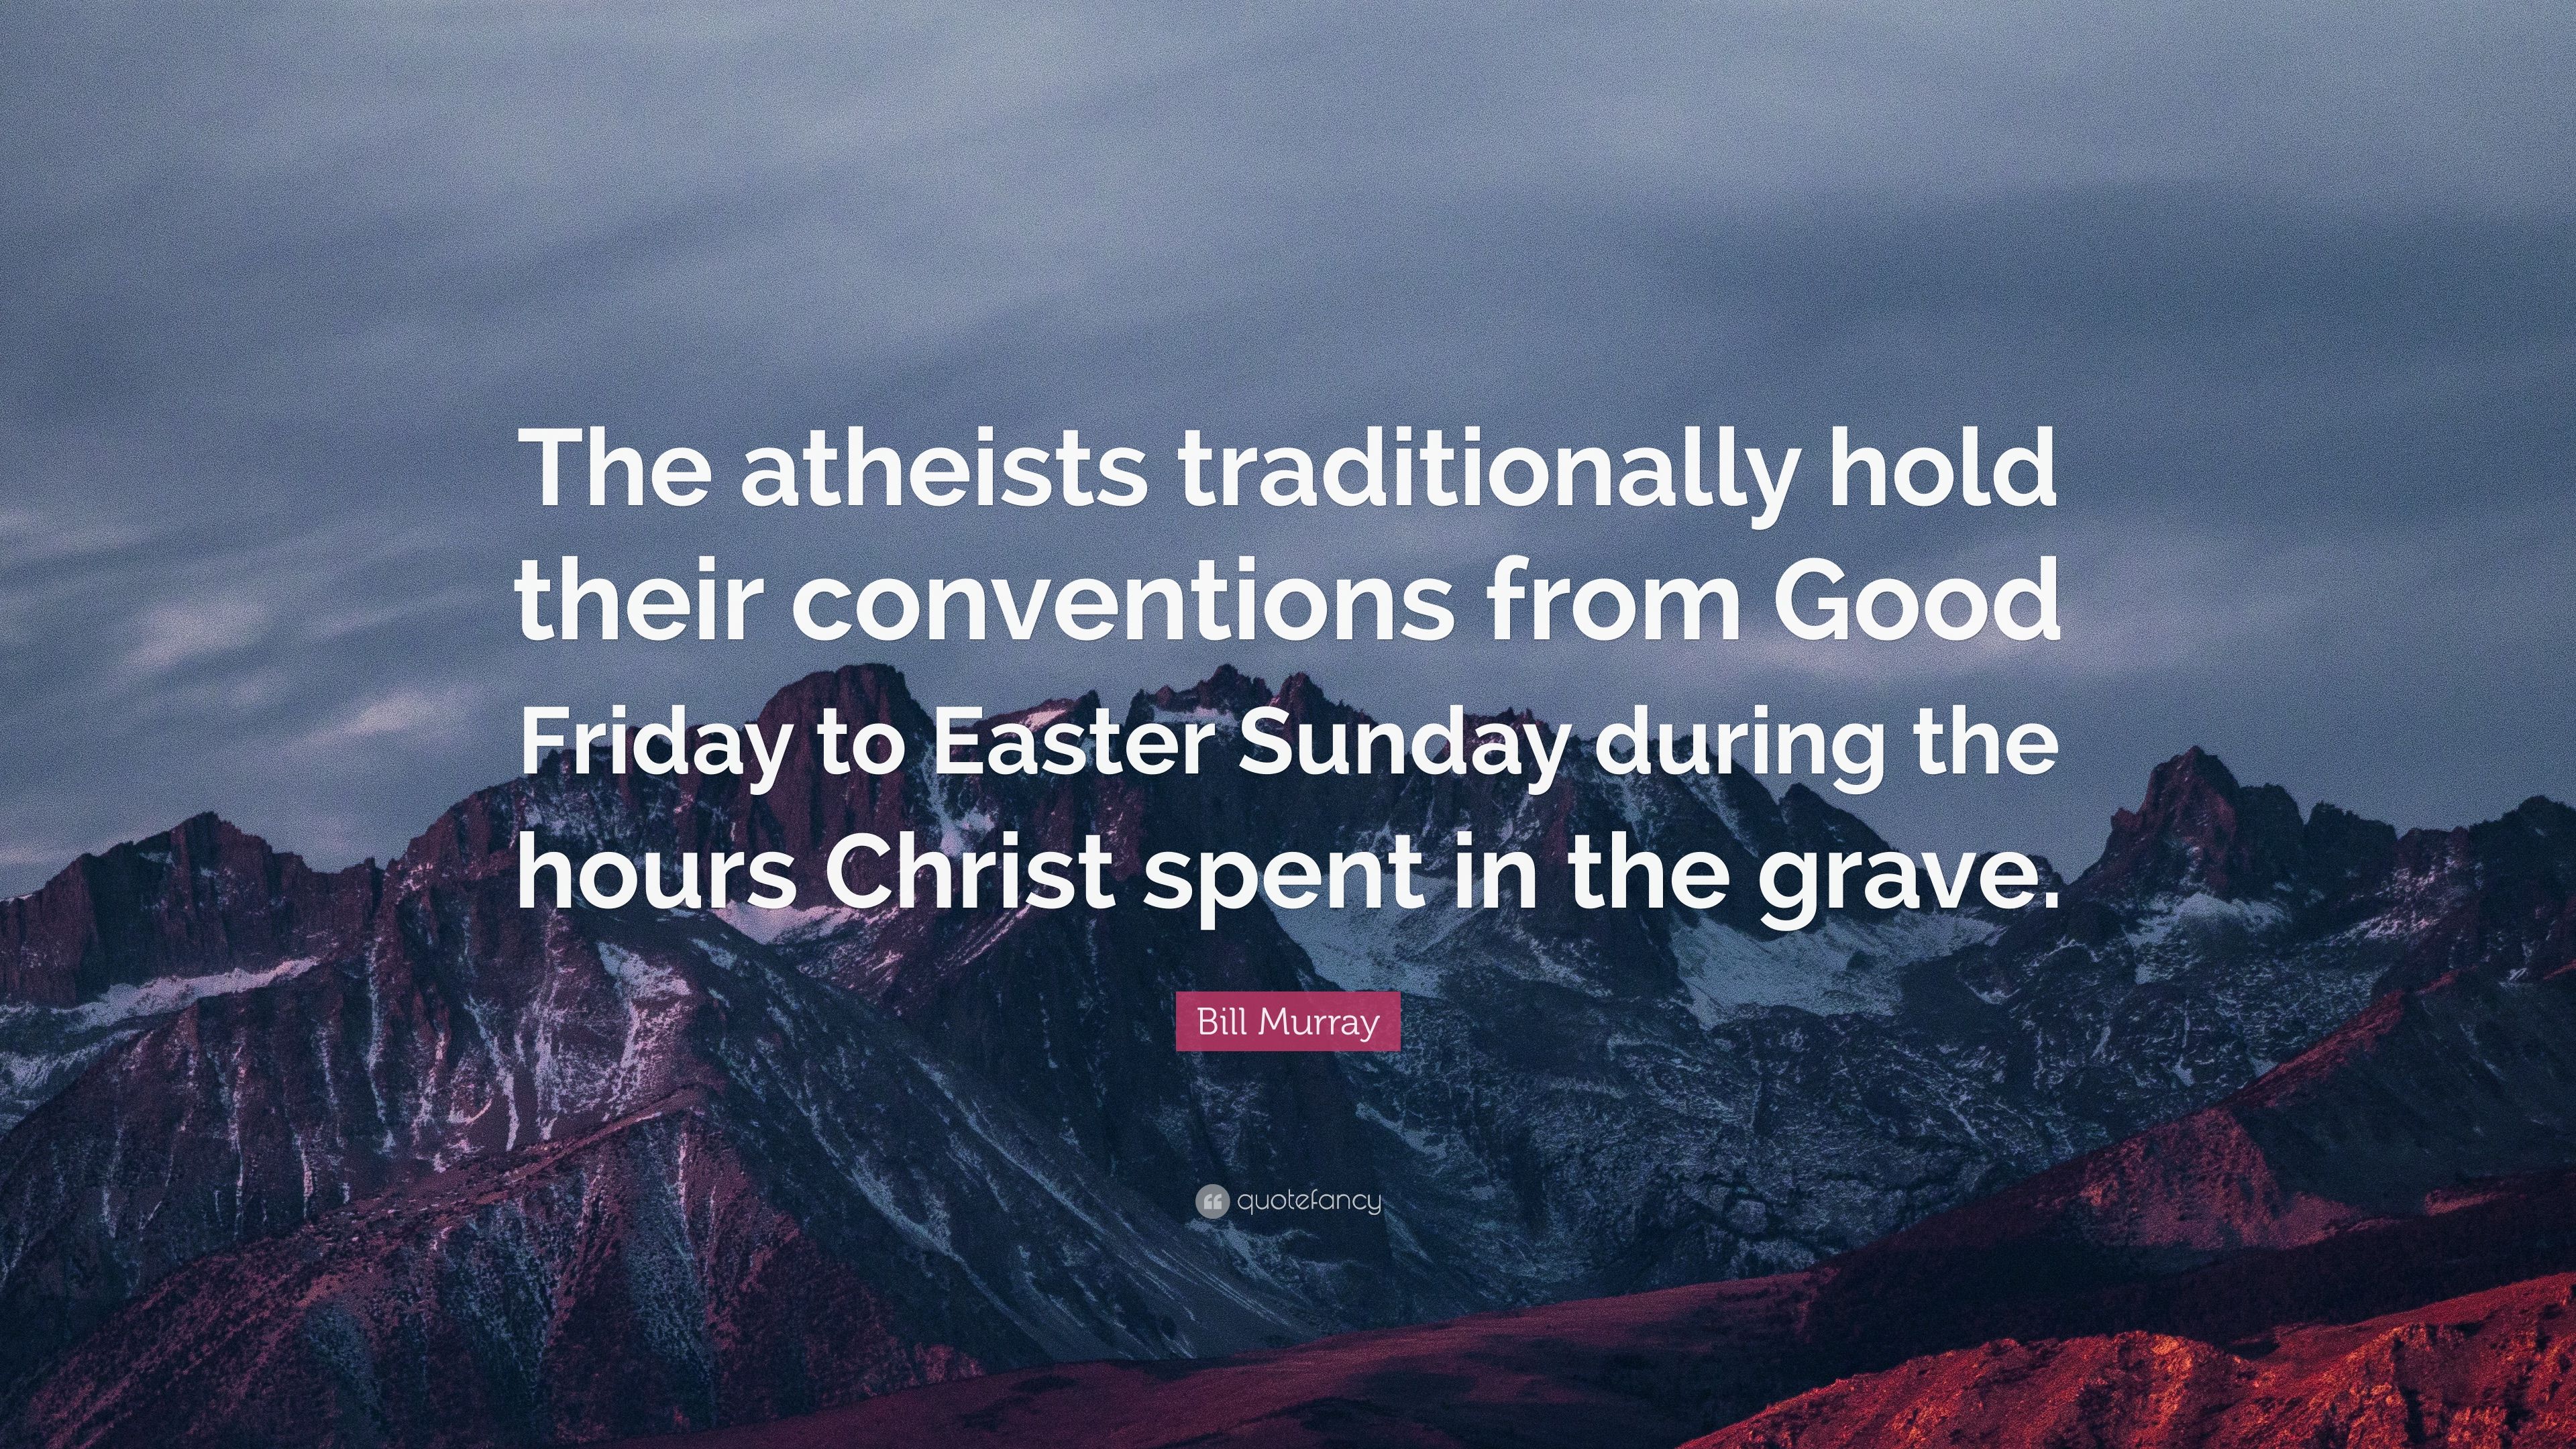 Bill Murray Quote: “The atheists traditionally hold their